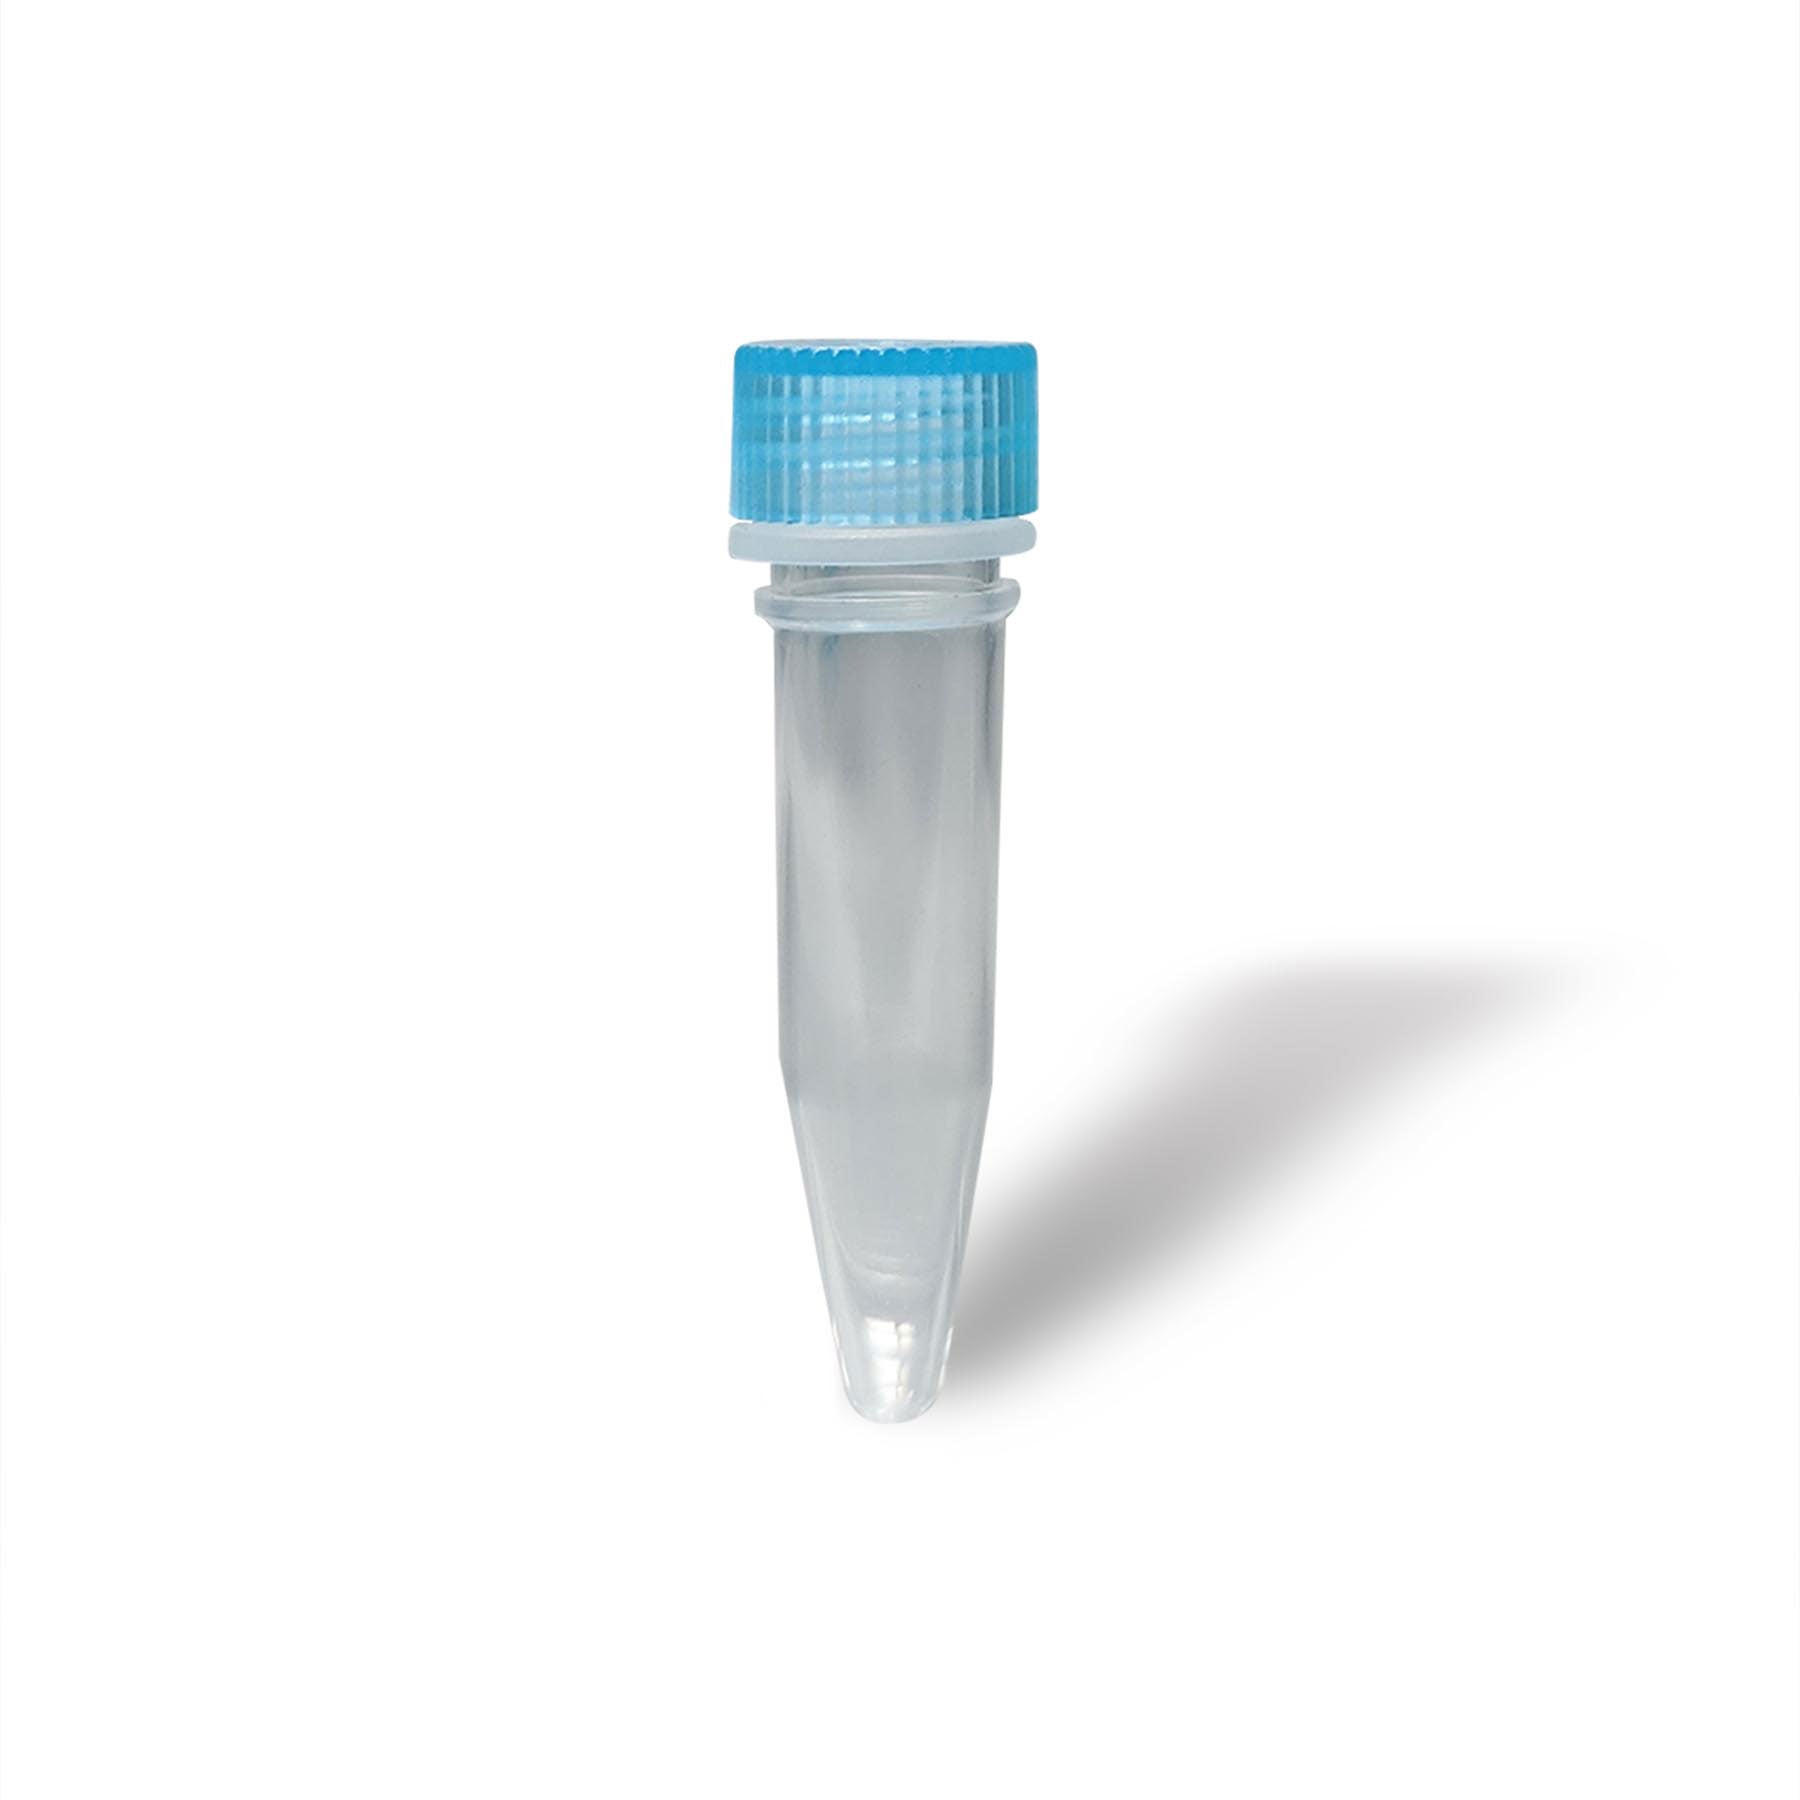 MTC Bio C3205-C, Clearseal Microcentrifuge Tube, 0.5ml, Sterile, Non-Graduated, Conical Bottom, 20 Resealable Bags of 50 Tubes, 1000/cs